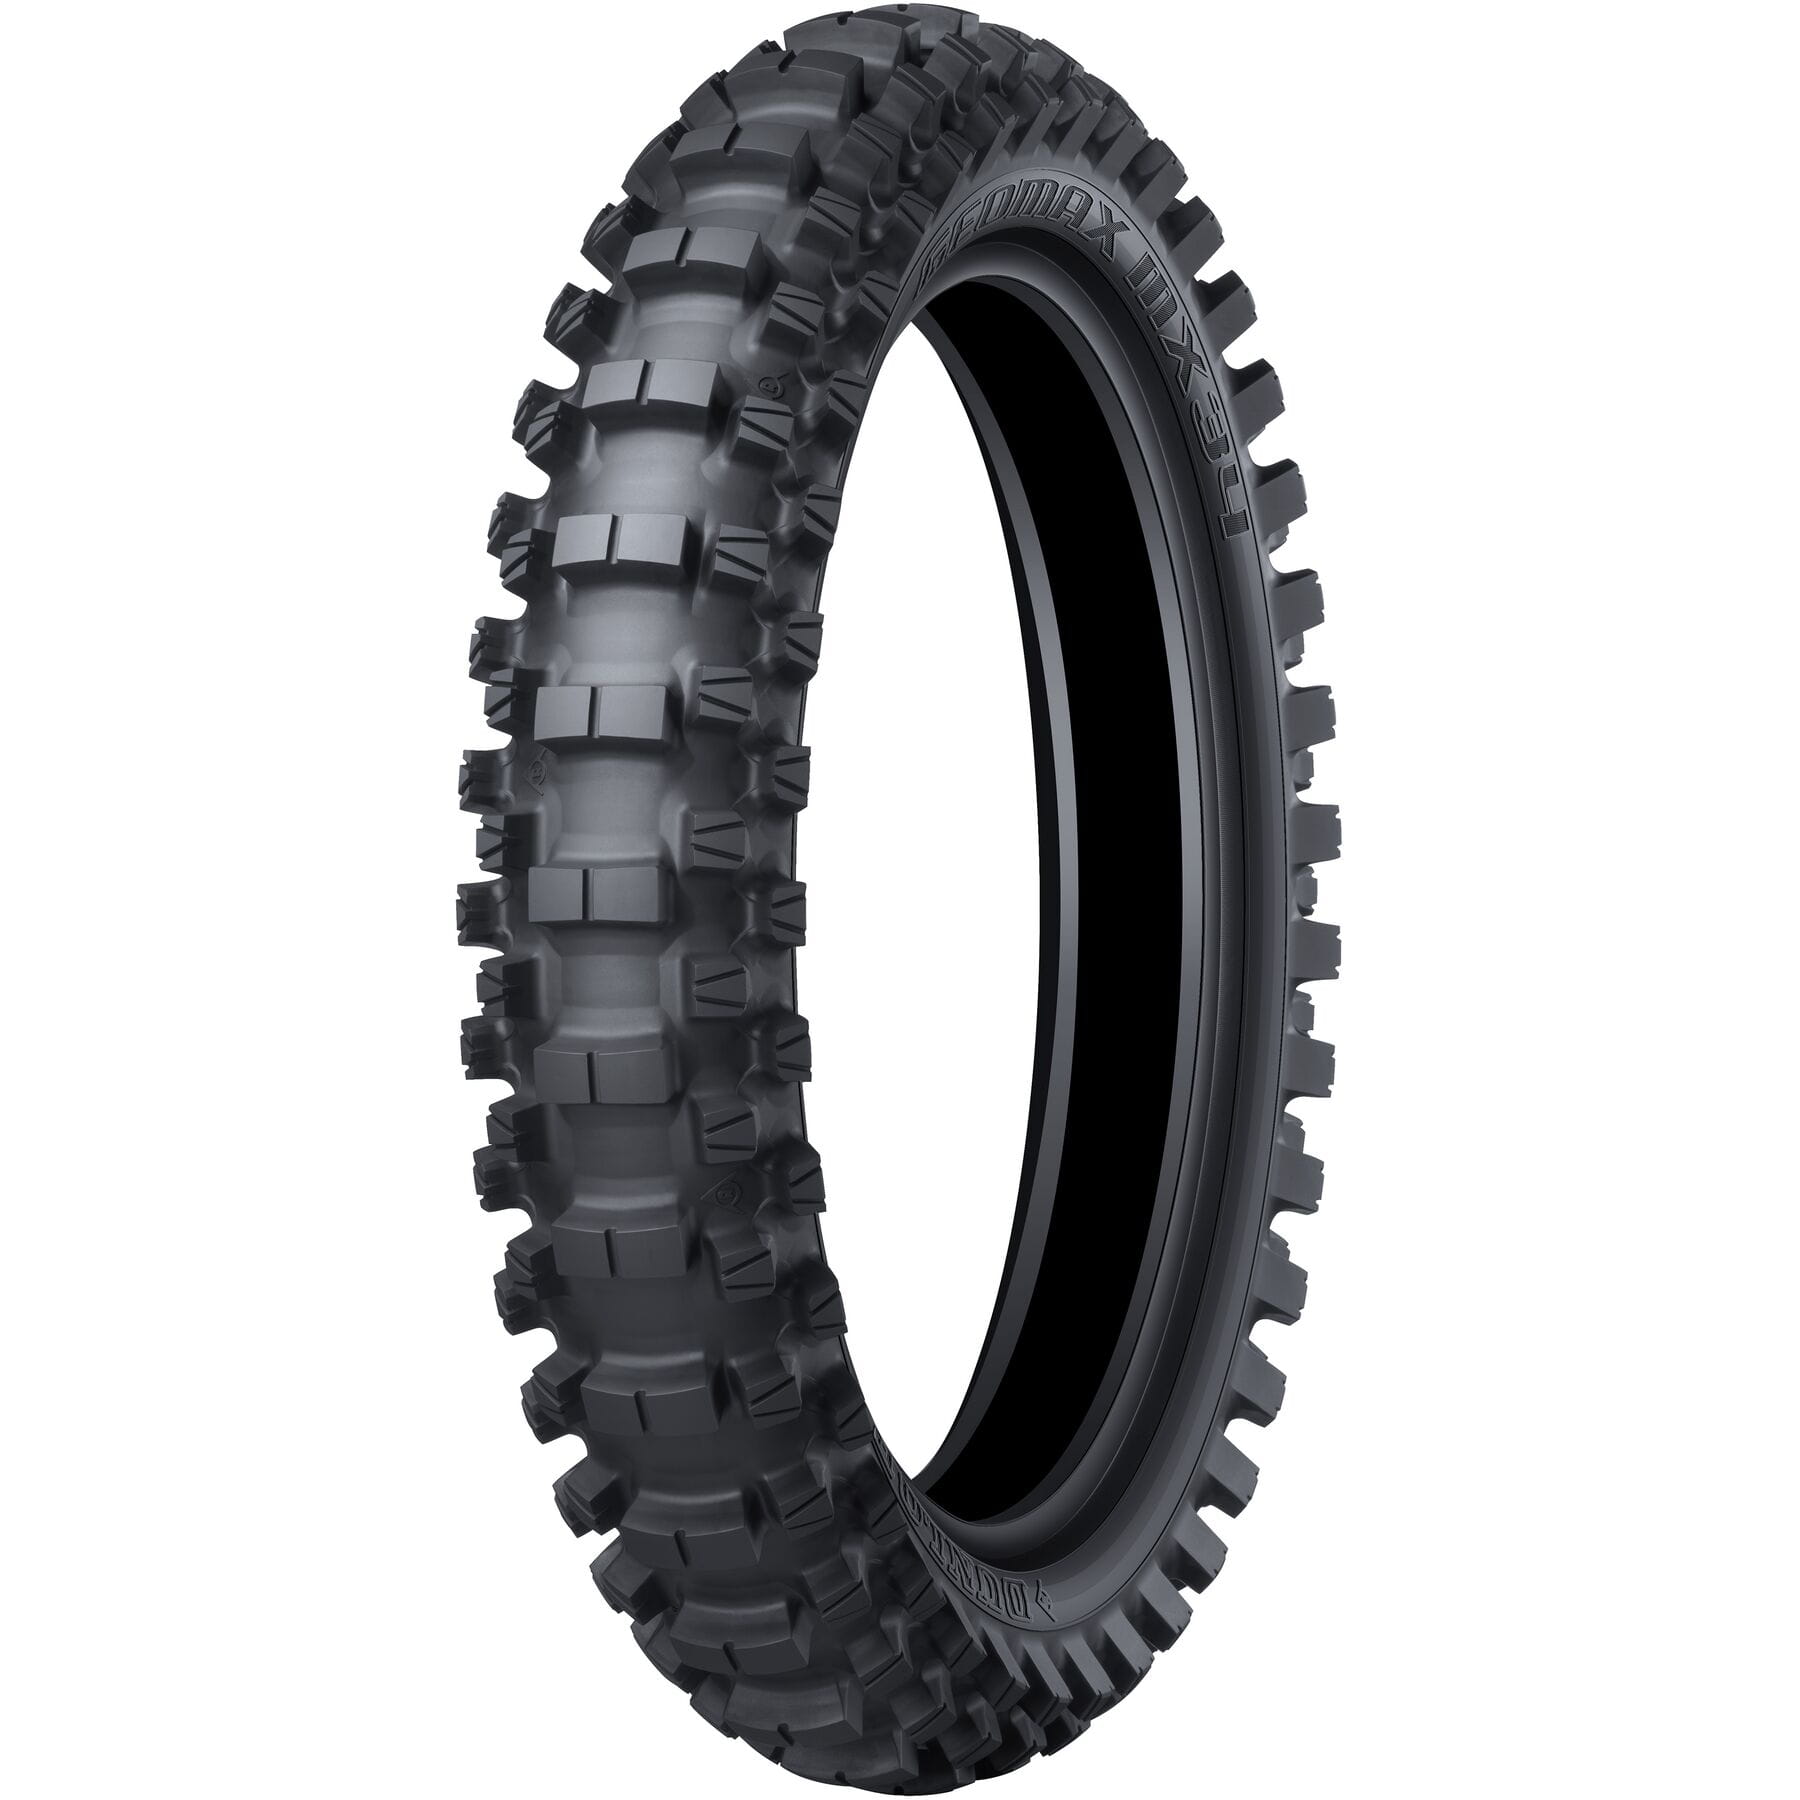 Dunlop Rear Tyre 110/90-19 GEOMAX MX34 displayed on white background